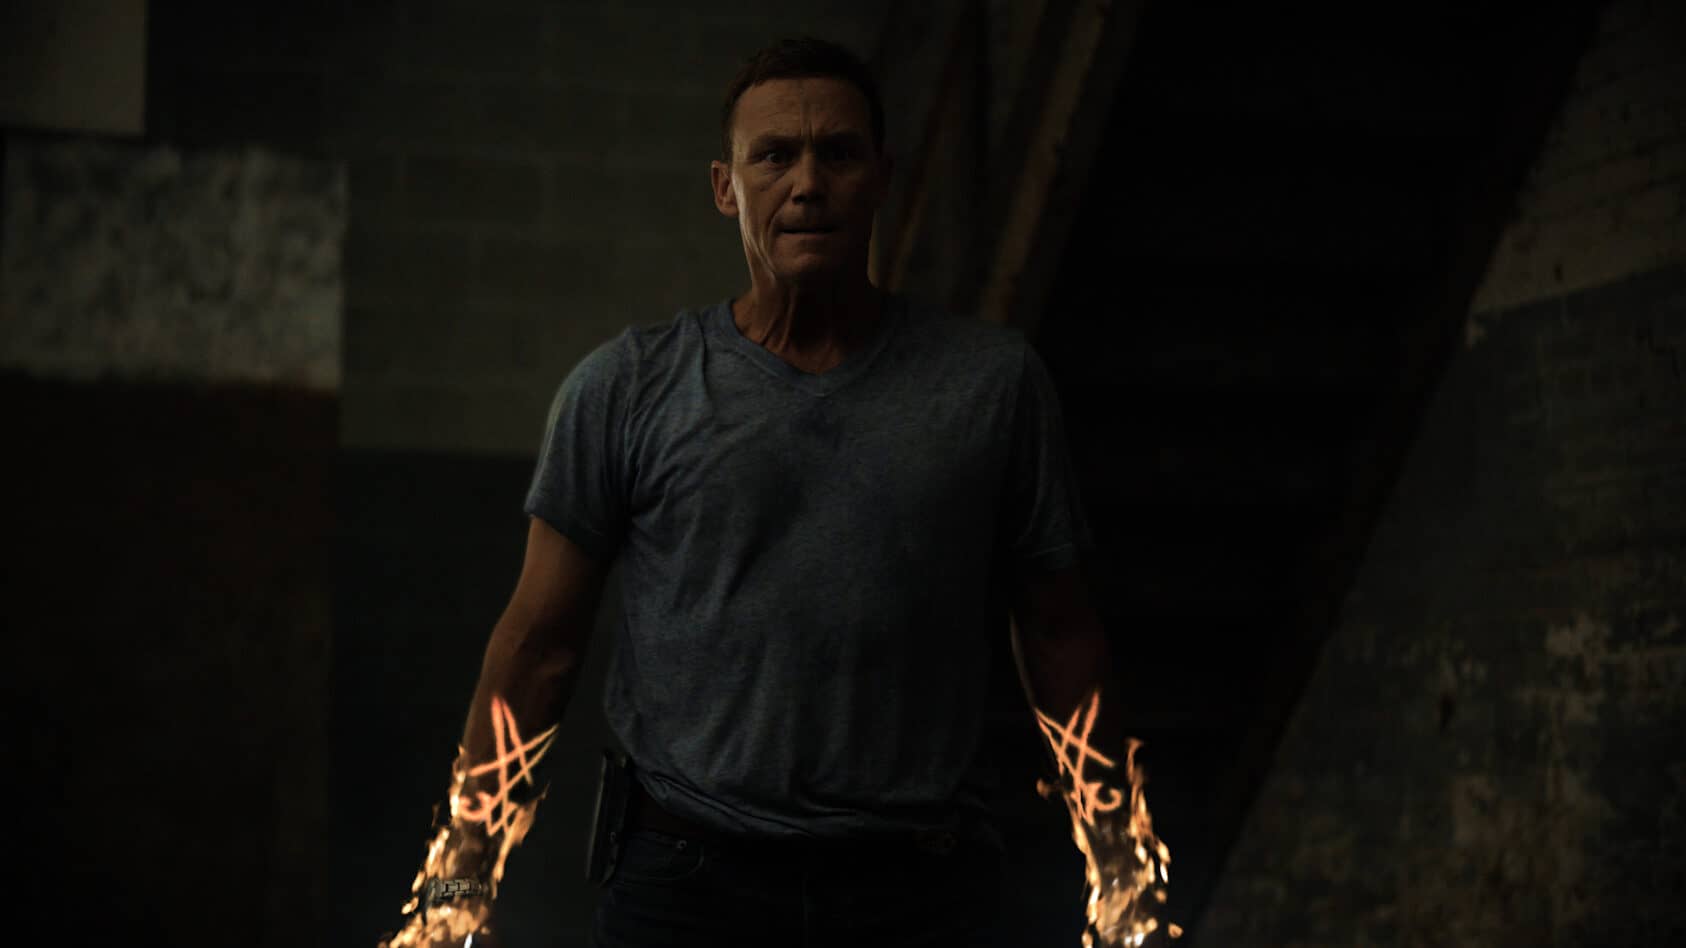 Brian Krause in the Demonologist